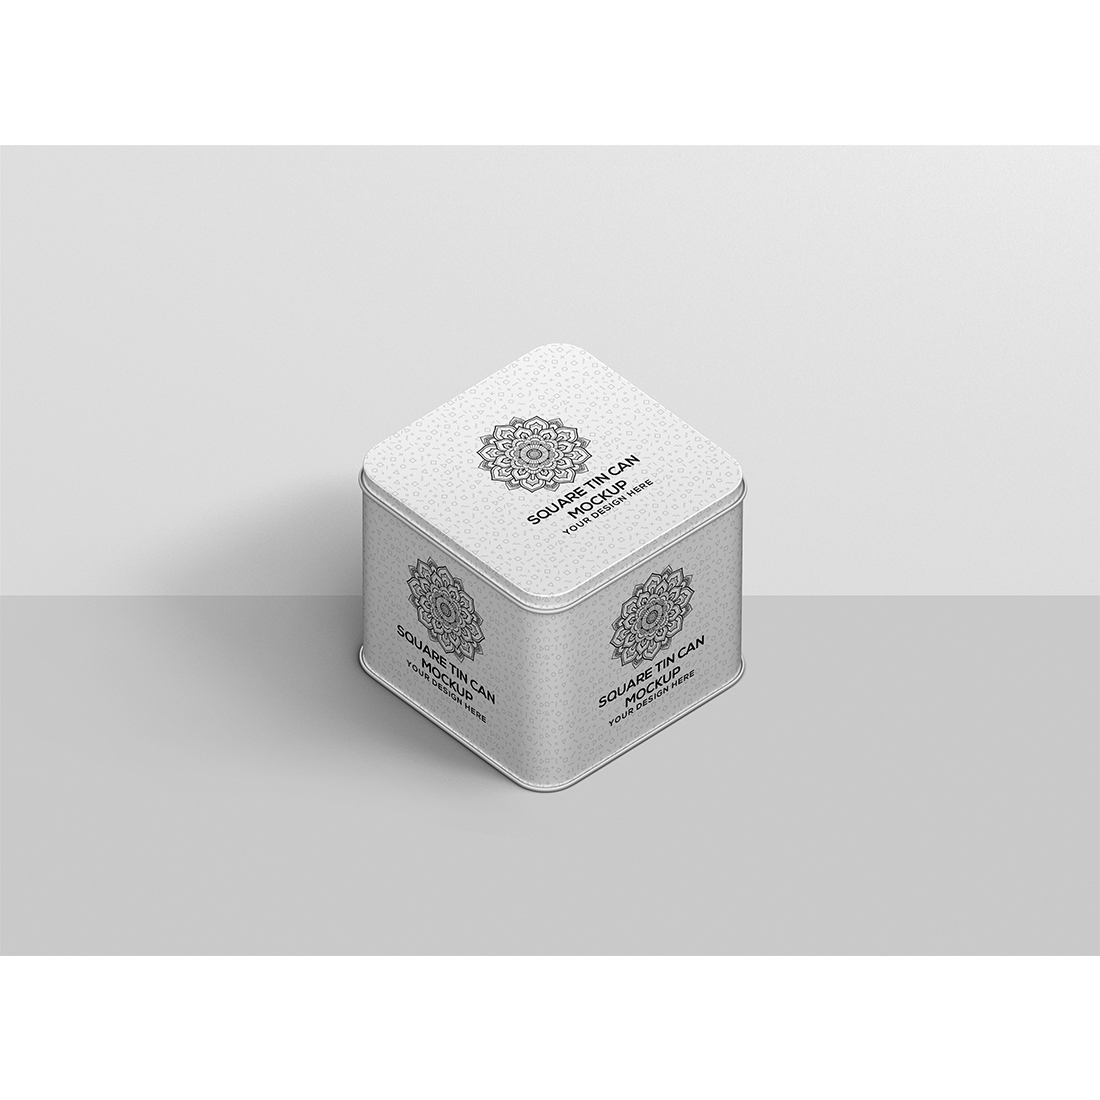 Square Tin Can Mockup cover image.